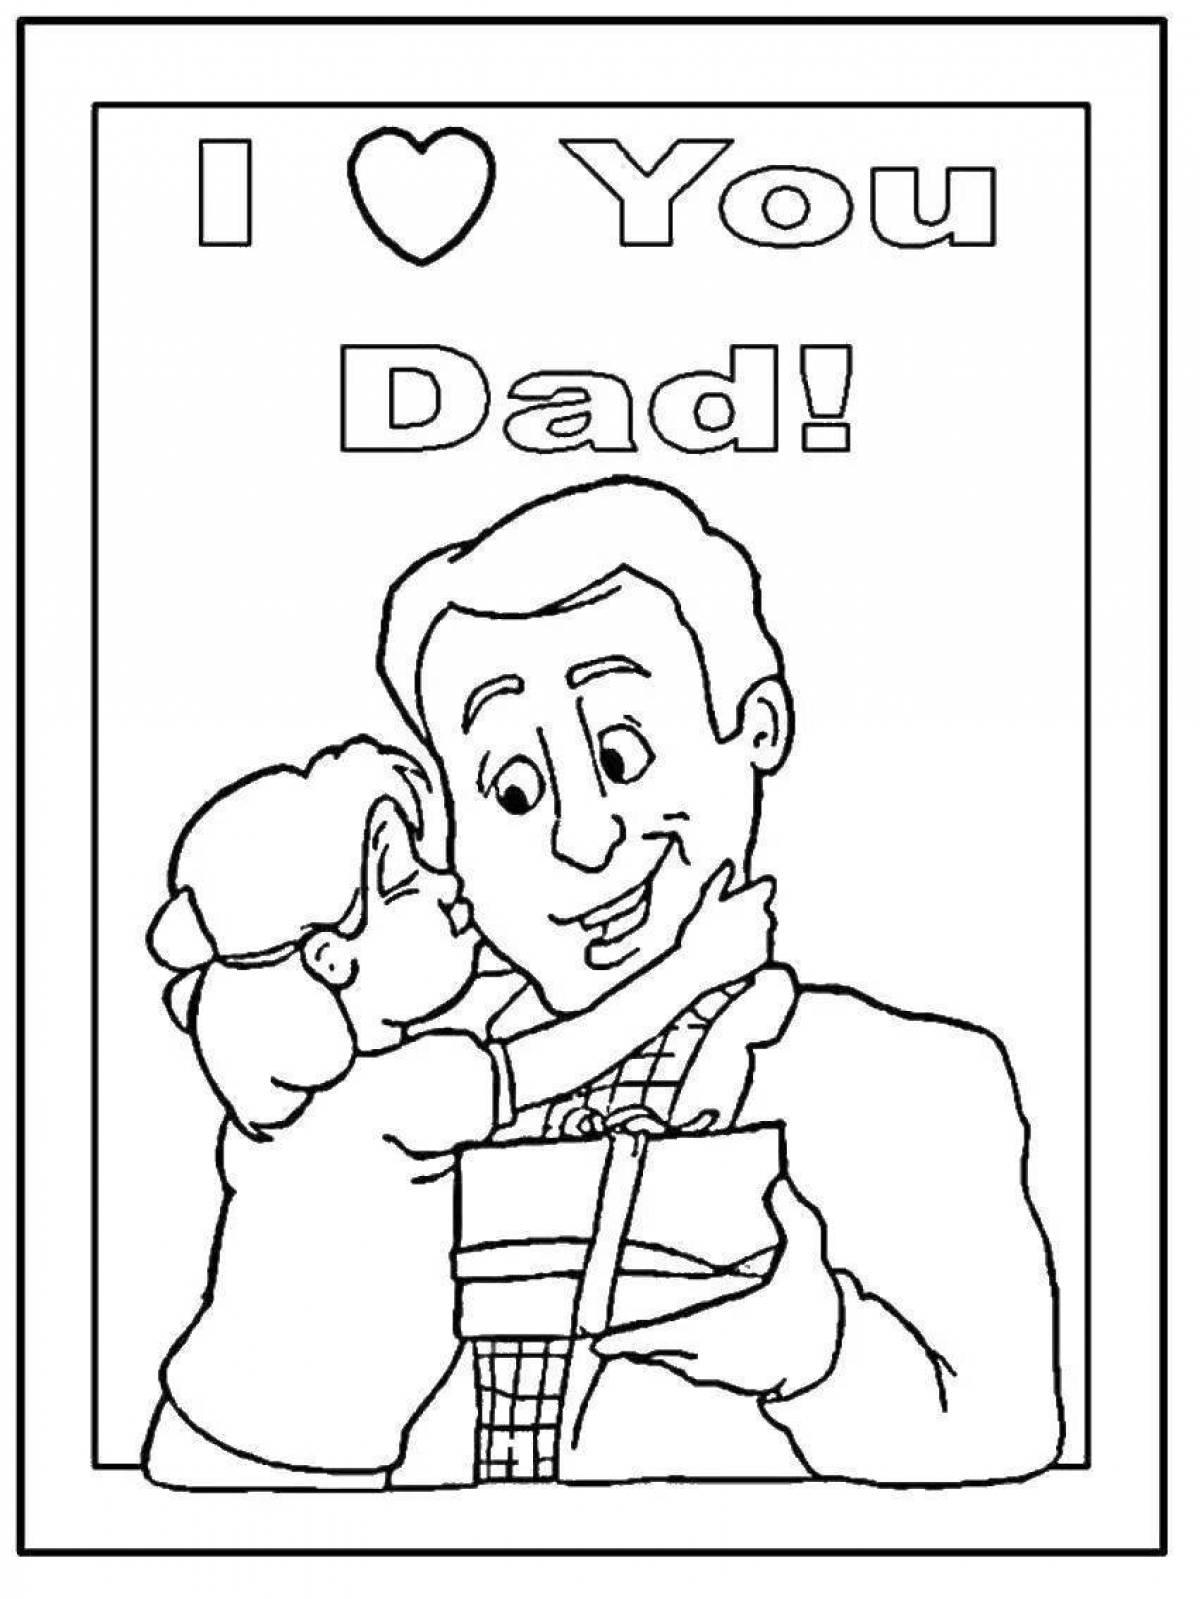 Great gift for dad coloring pages